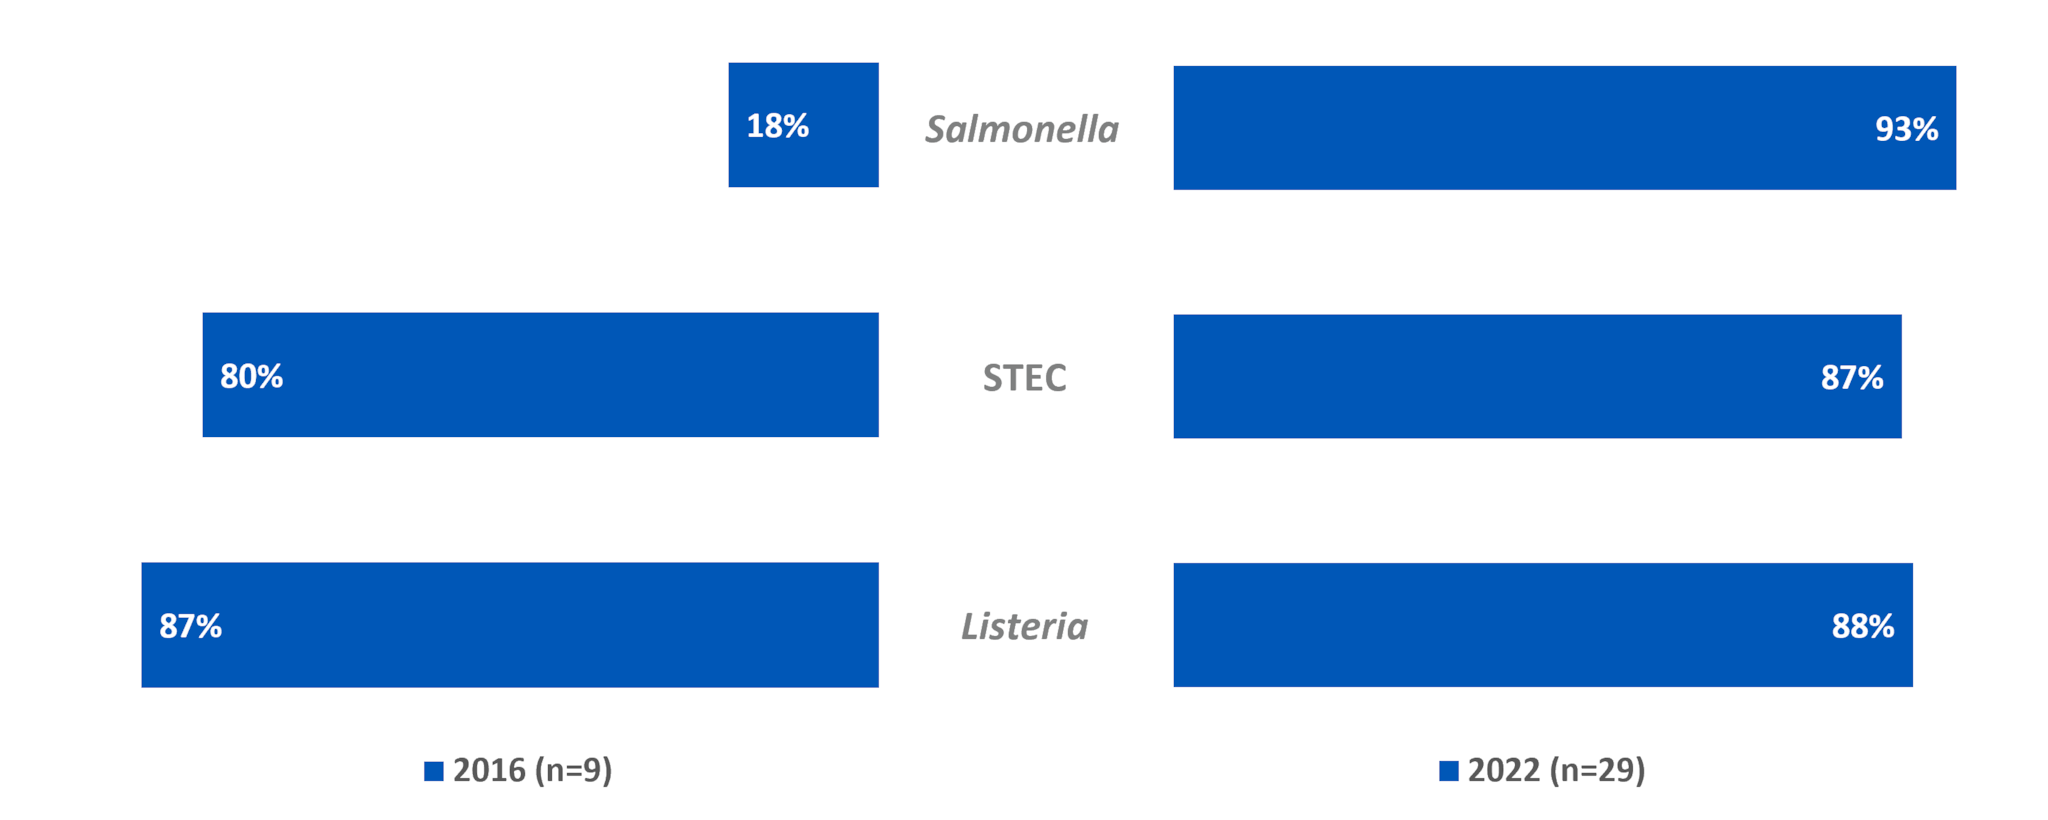 In 2016 (n=9), 18% of Salmonella isolates, 80% of STEC isolates, and 87% of Listeria isolates were tested. In 2022 (n=29) 93% of Salmonella isolates, 87% of STEC isolates, and 88% of Listeria isolates were tested.